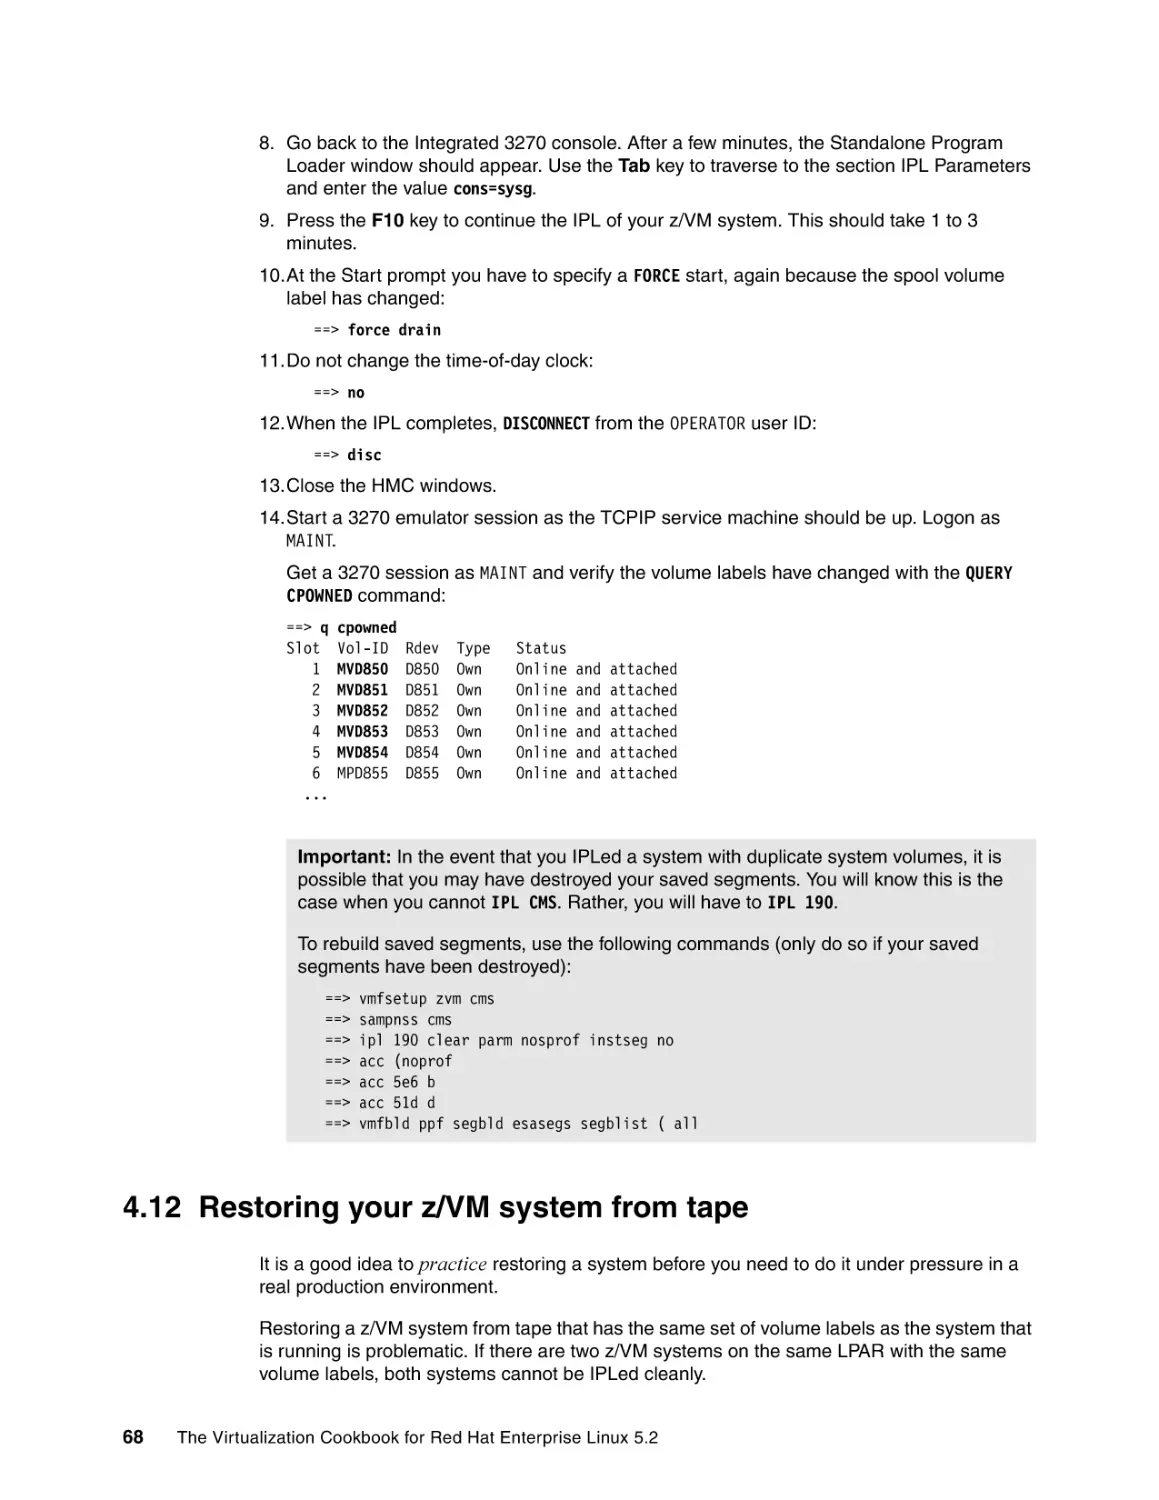 4.12 Restoring your z/VM system from tape